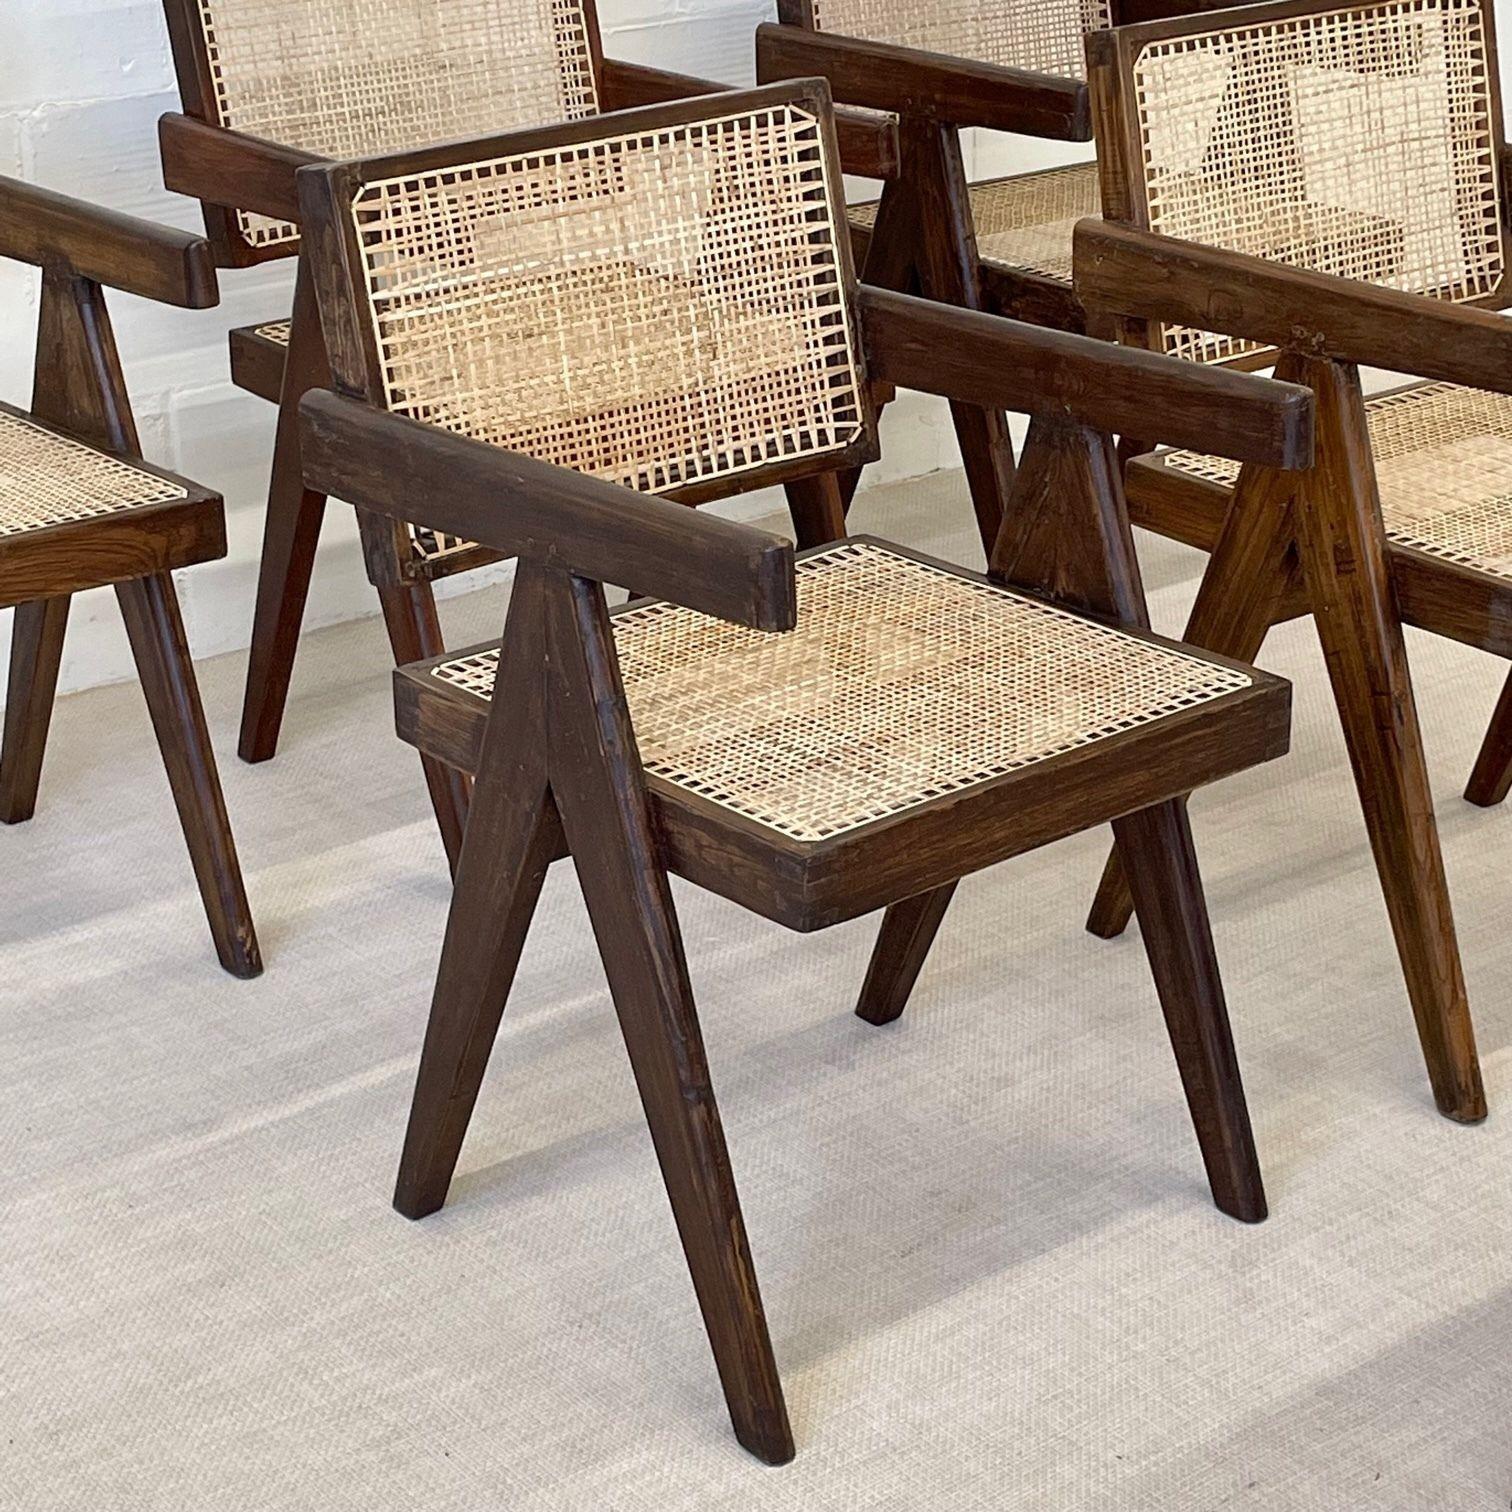 Six Mid Century Modern Pierre Jeanneret Floating Back Chairs, Teak, Cane, 1950s In Good Condition In Stamford, CT